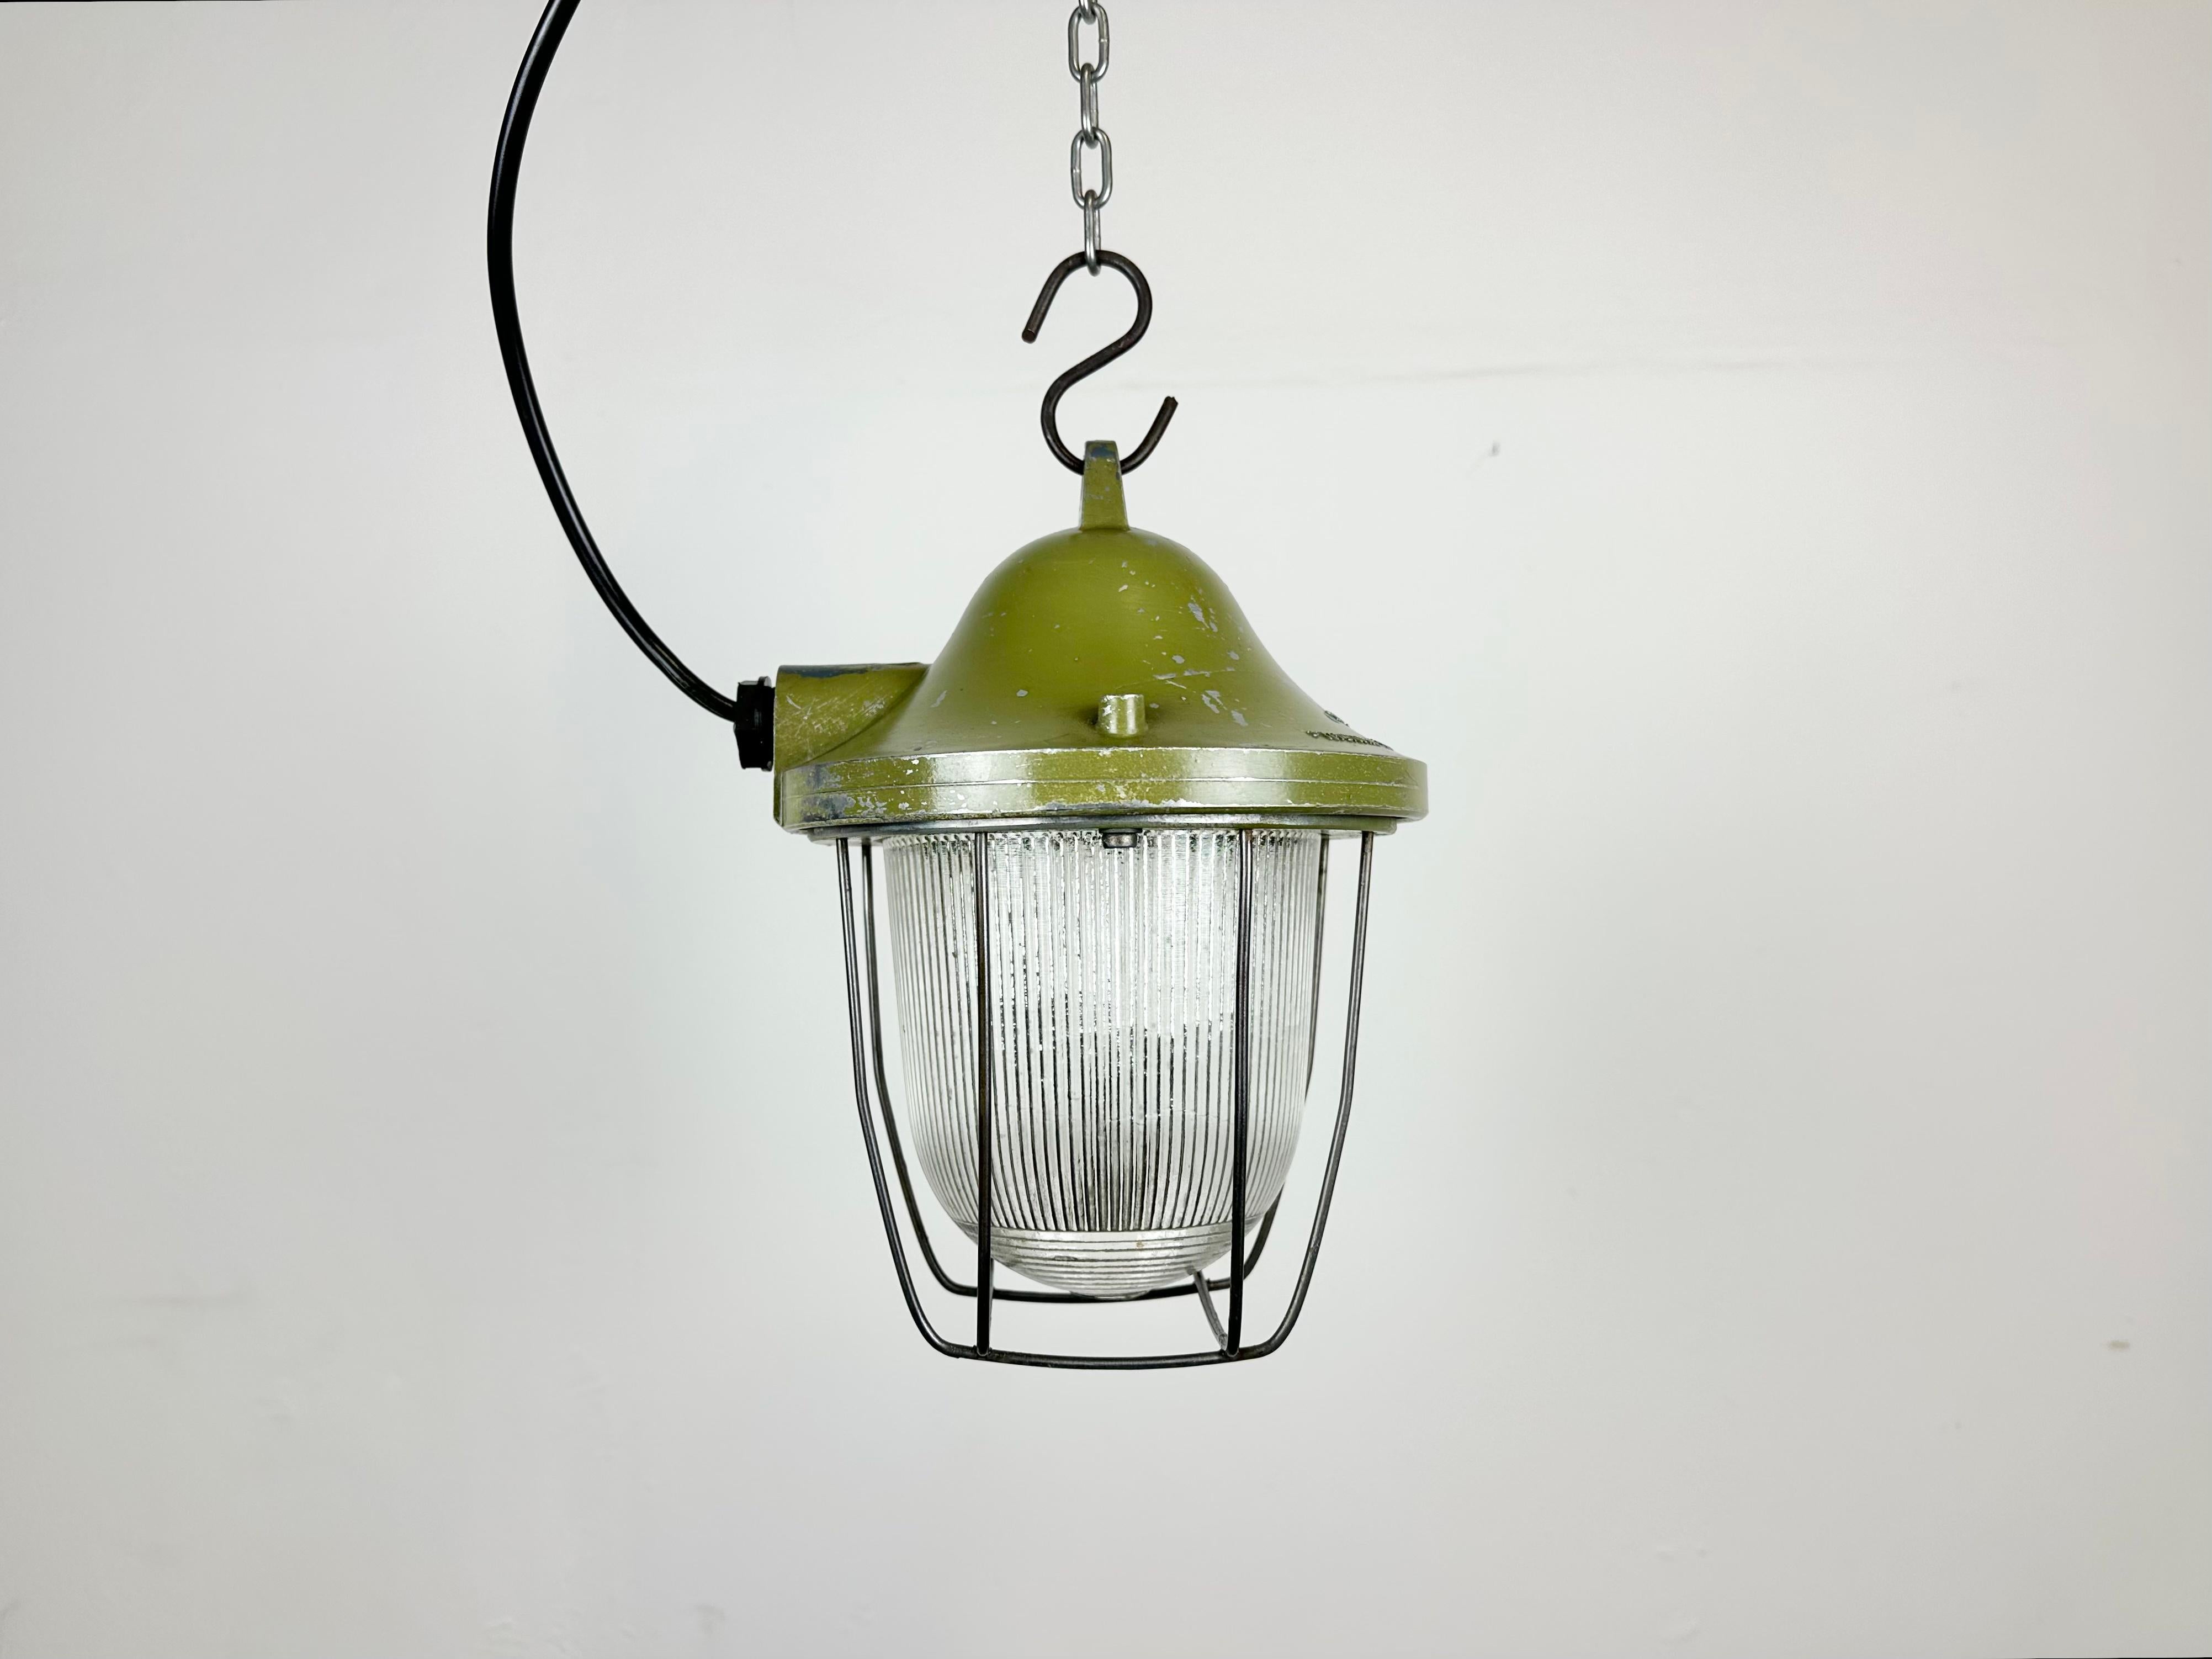 Green industrial lamp made by Polam Gdansk in Poland during the 1960s. It features a cast aluminium body, an iron cage and striped glass. The porcelain socket requires E 27/ E 26 lightbulbs. New wire. The weight of the lamp is 1,6 kg.
  